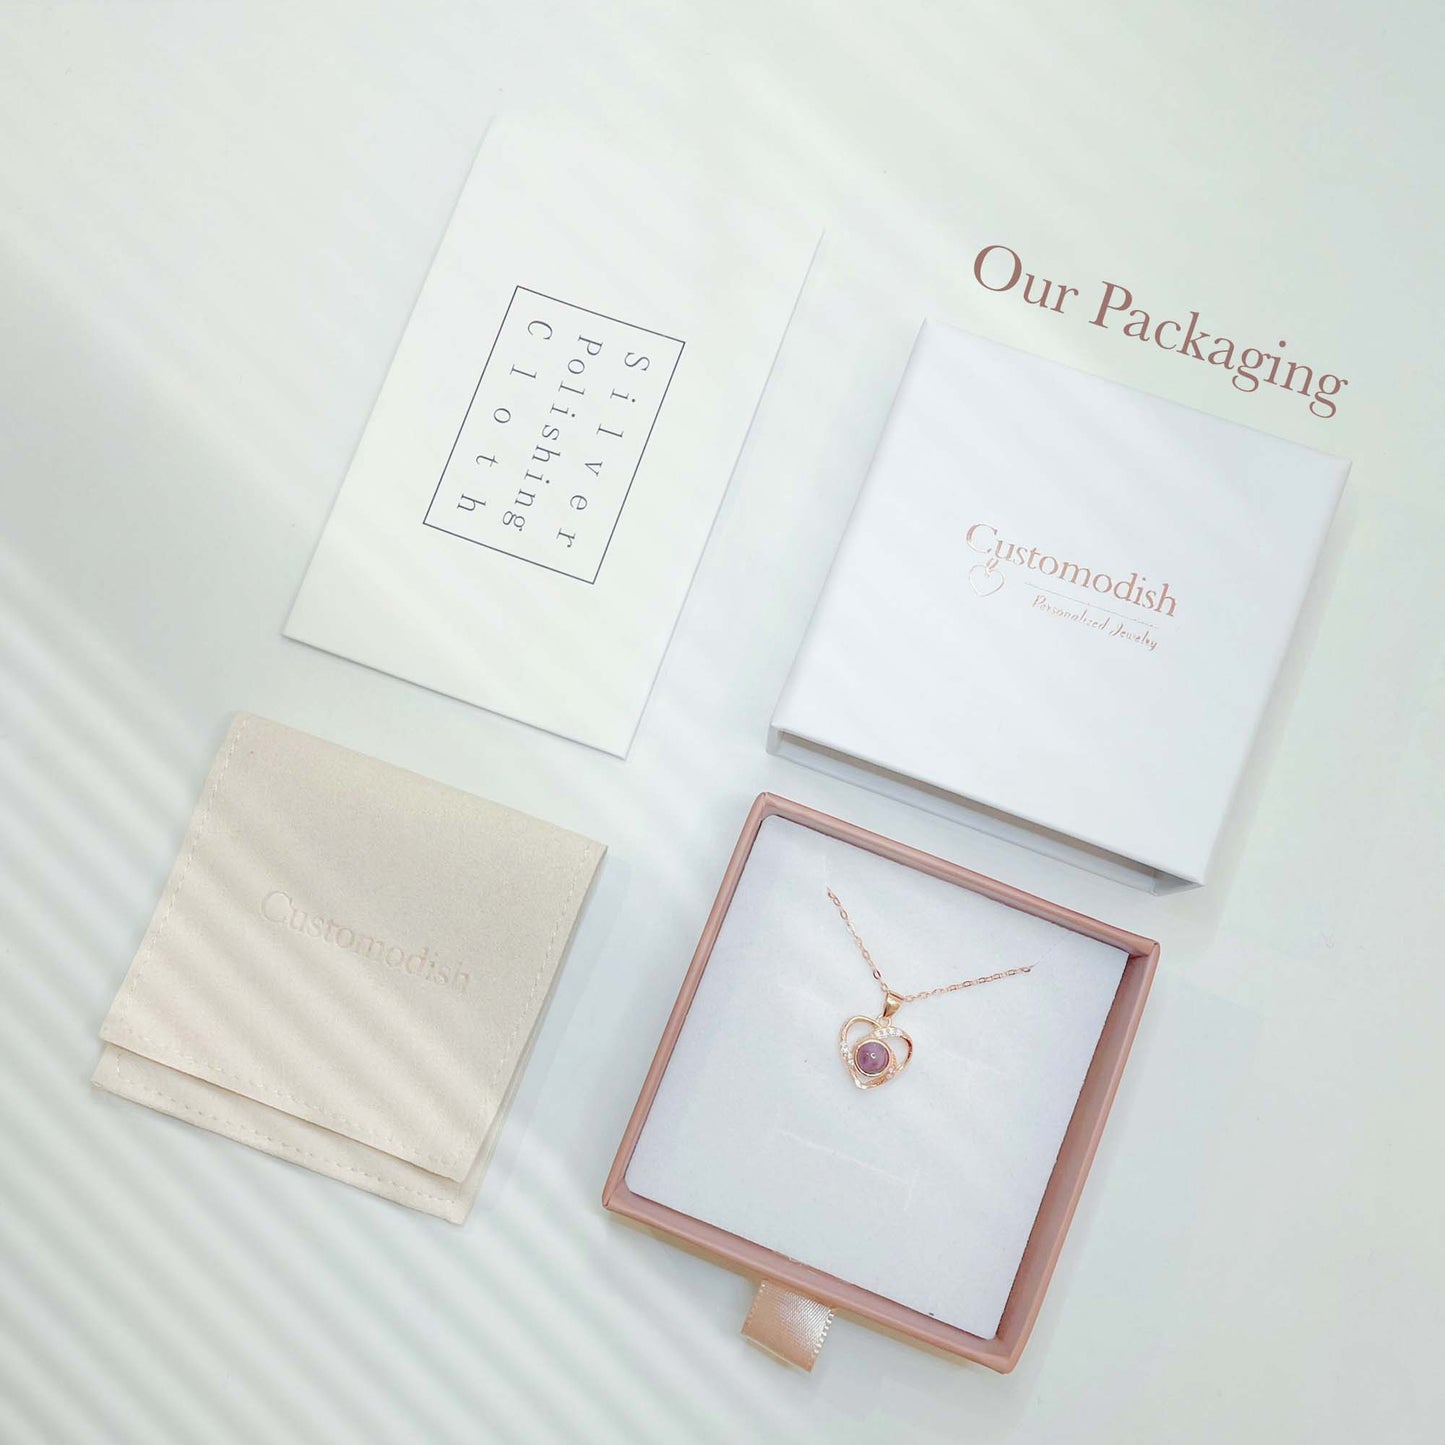 Our packaging. Read photo projection necklace reviews at Customodish!